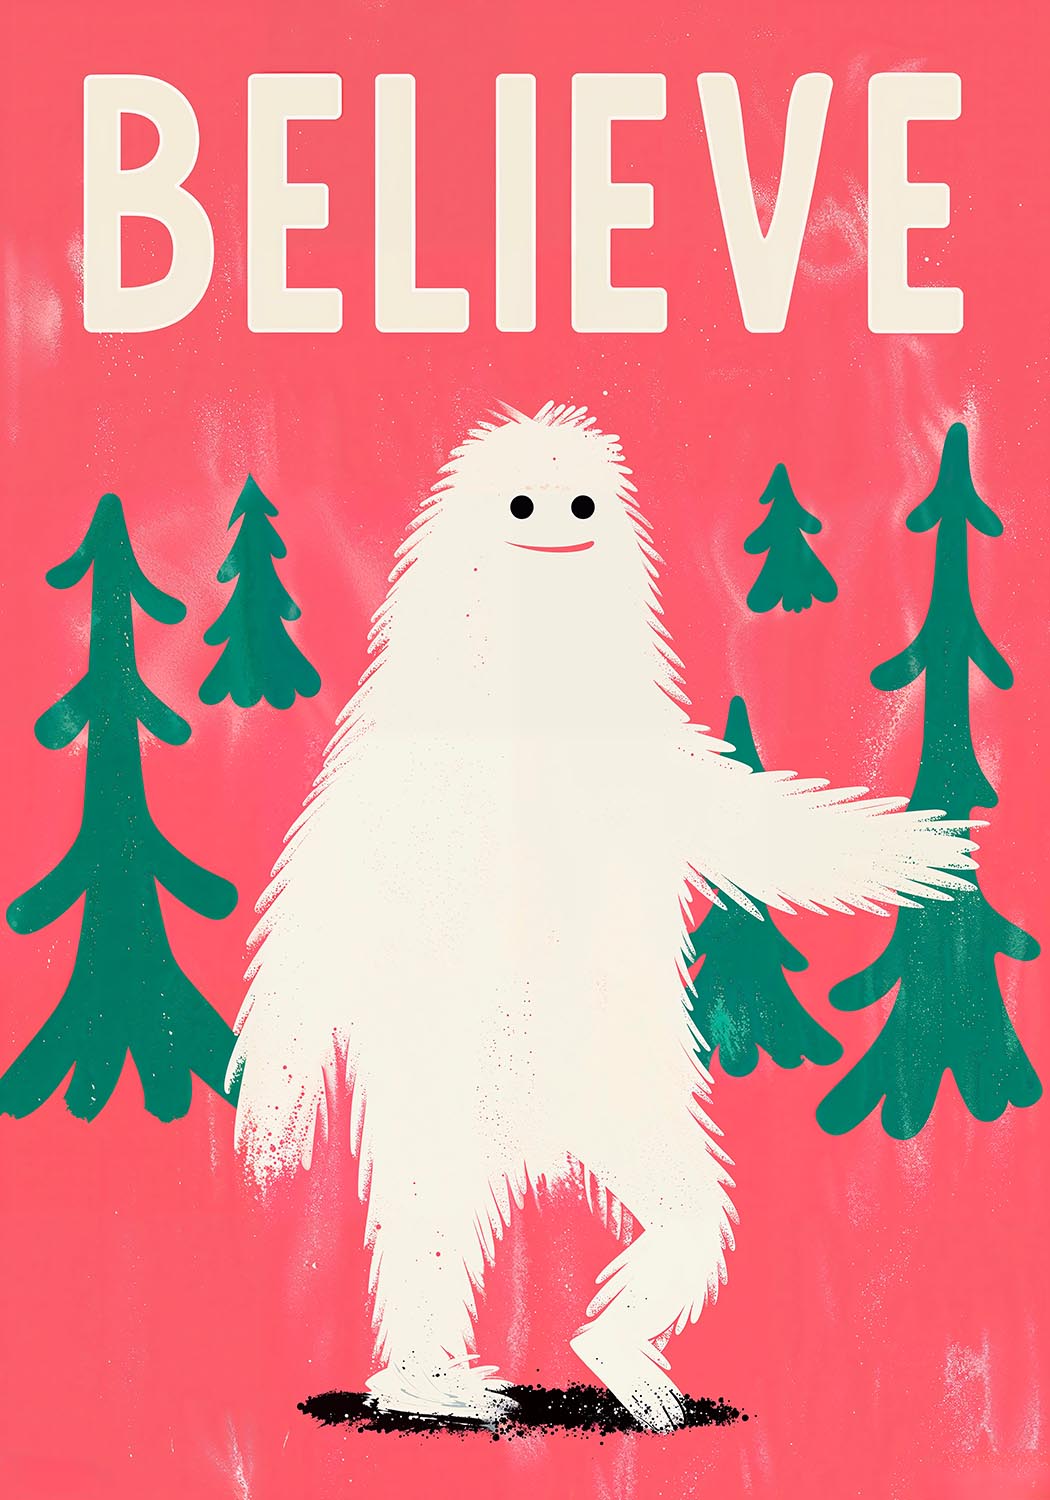 Whimsical poster illustration of a smiling Bigfoot with the word 'BELIEVE' in bold letters above and green pine trees on a vibrant red background.